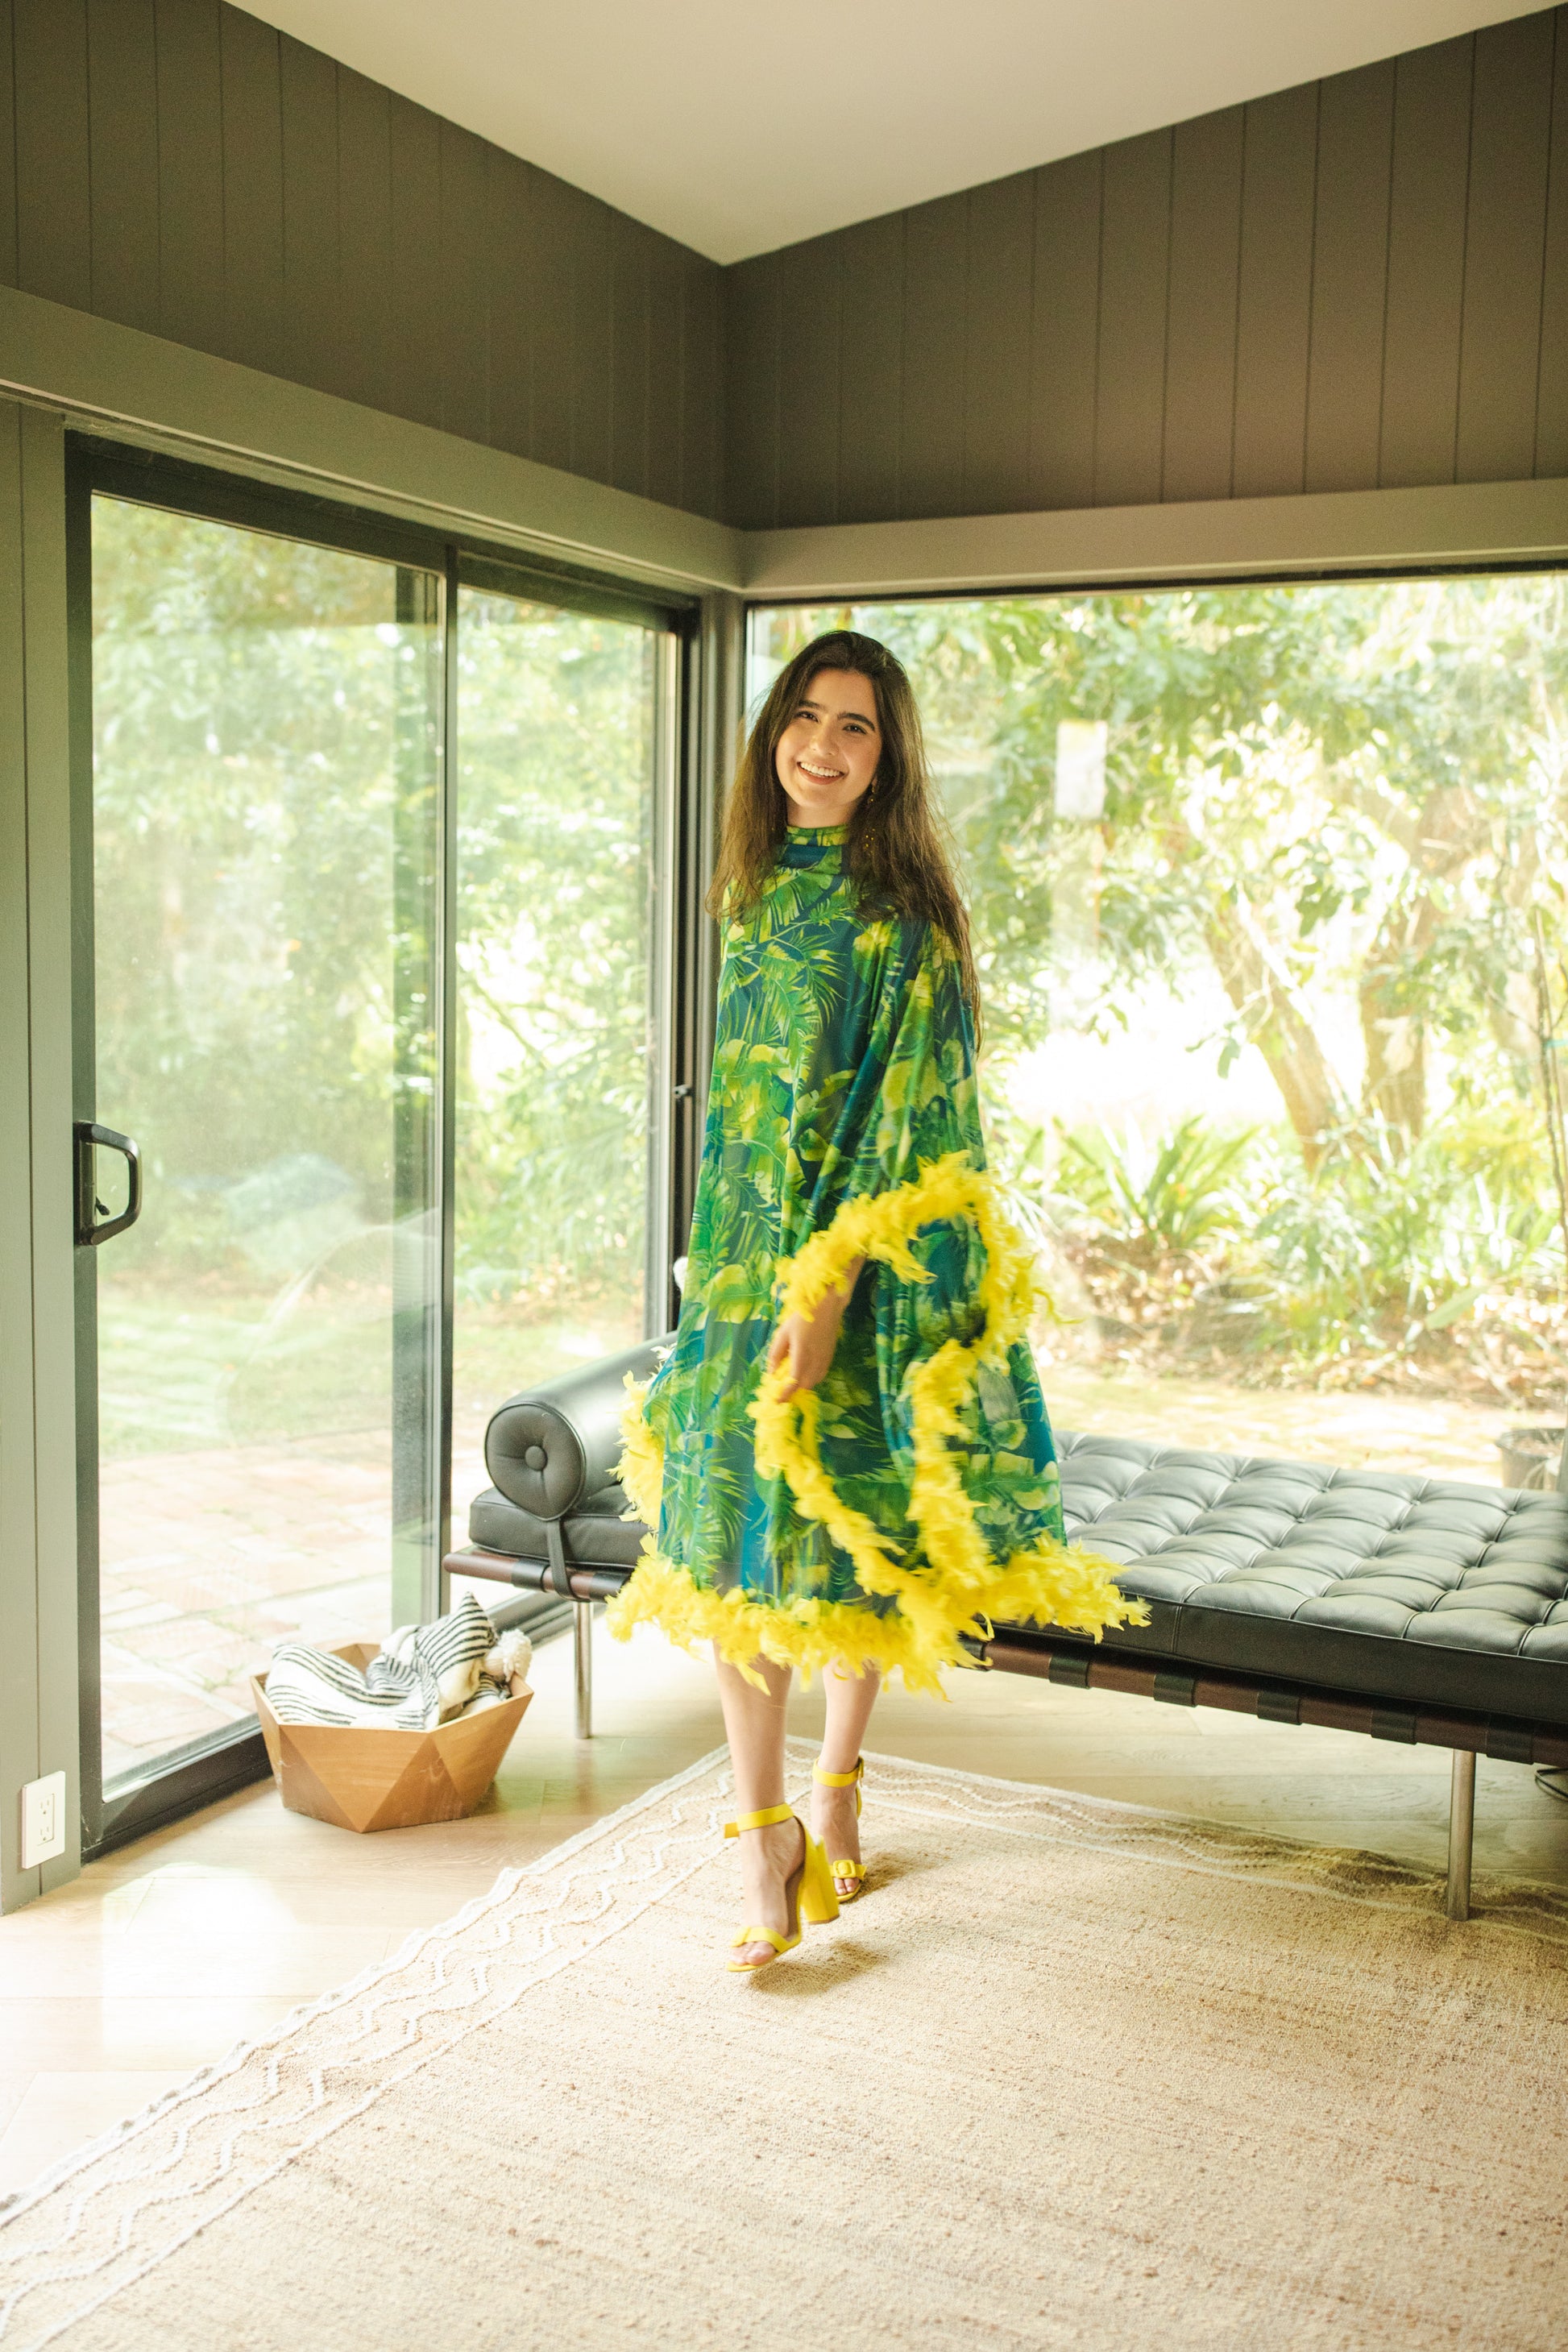 jennafer grace Palma Feather Caftan with slip vibrant tropical emerald green and yellow palm leaf print on dark blue kaftan with canary yellow feather border at sleeves and hem boho bohemian hippie romantic whimsical beach cabana resort vacation lounge handmade in California USA